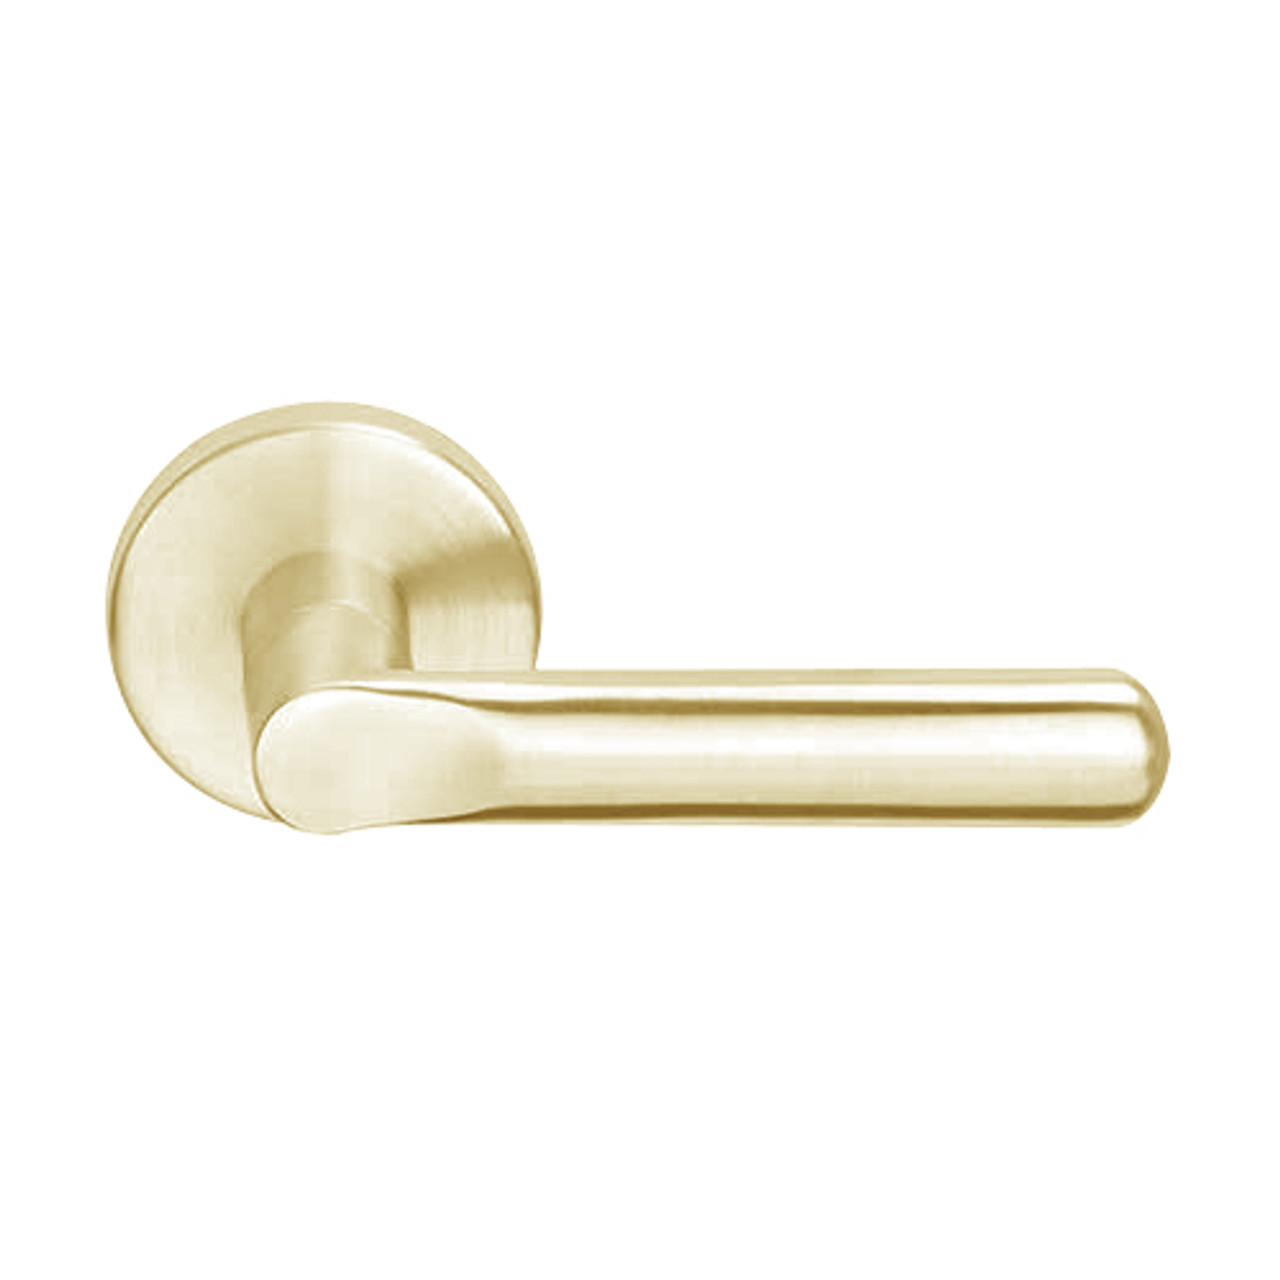 L9070P-18B-606 Schlage L Series Classroom Commercial Mortise Lock with 18 Cast Lever Design in Satin Brass